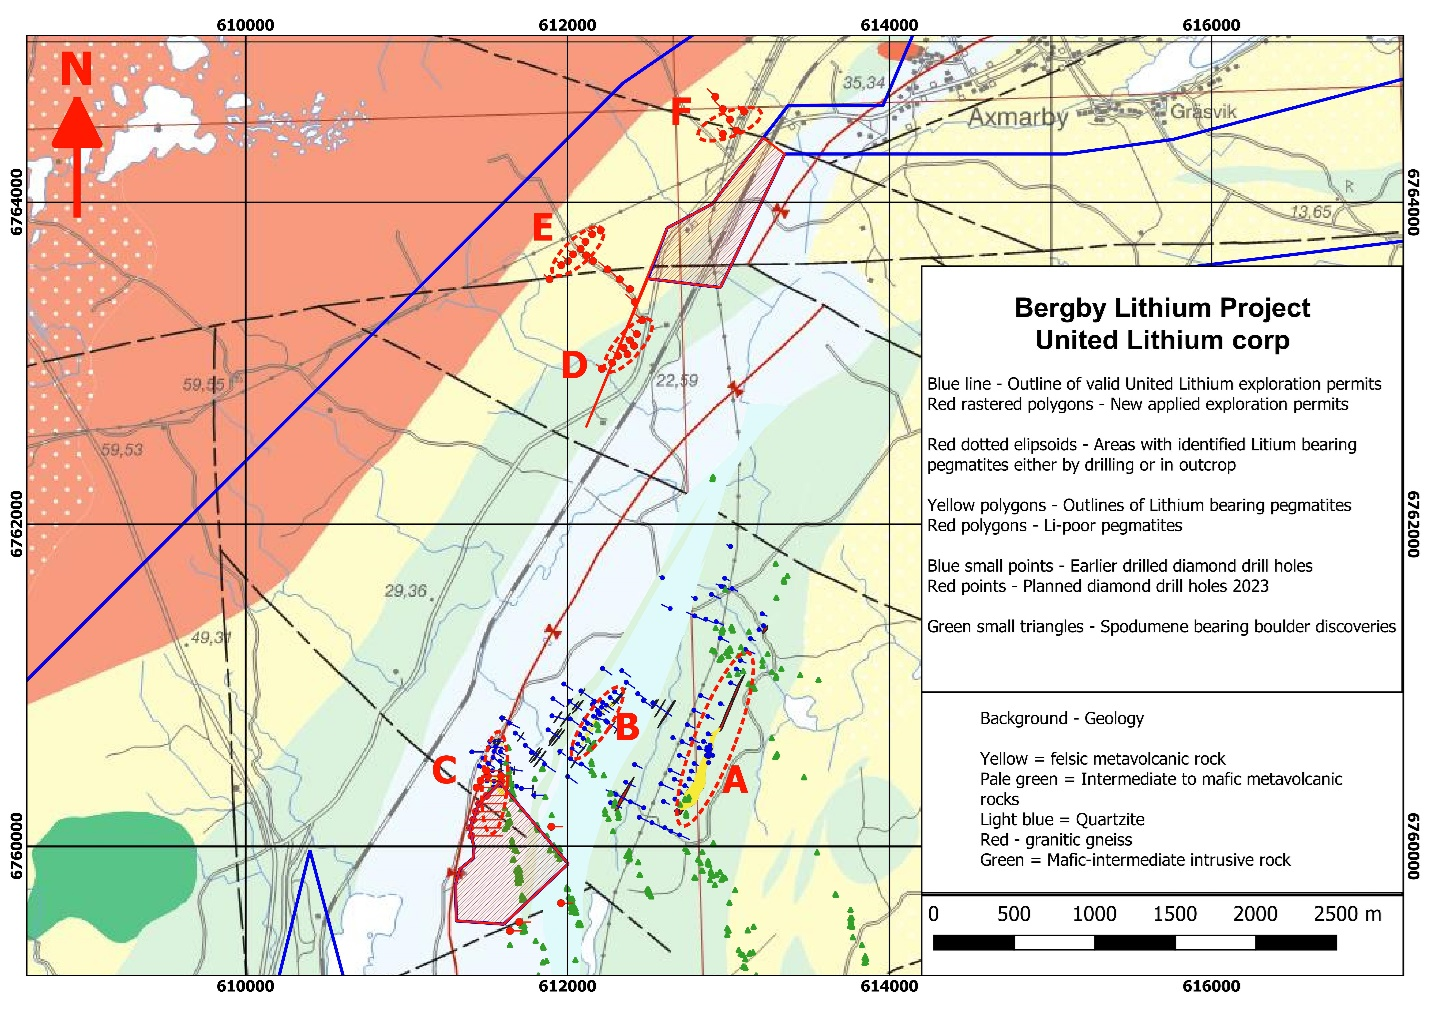 Bergby Lithium Project Drill Targets